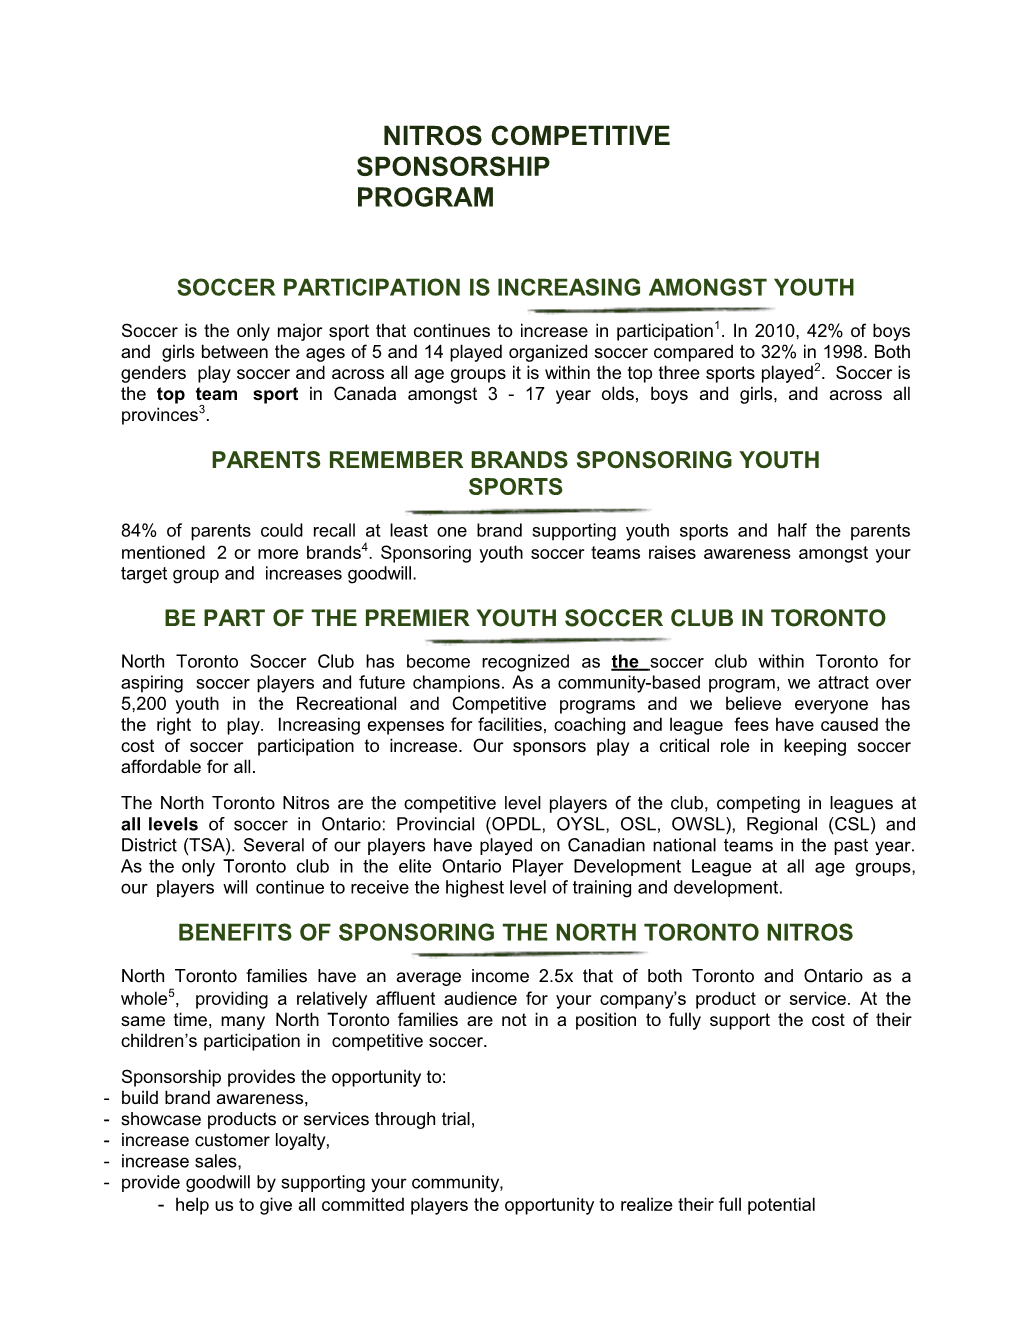 Soccer Participationis Increasingamongstyouth